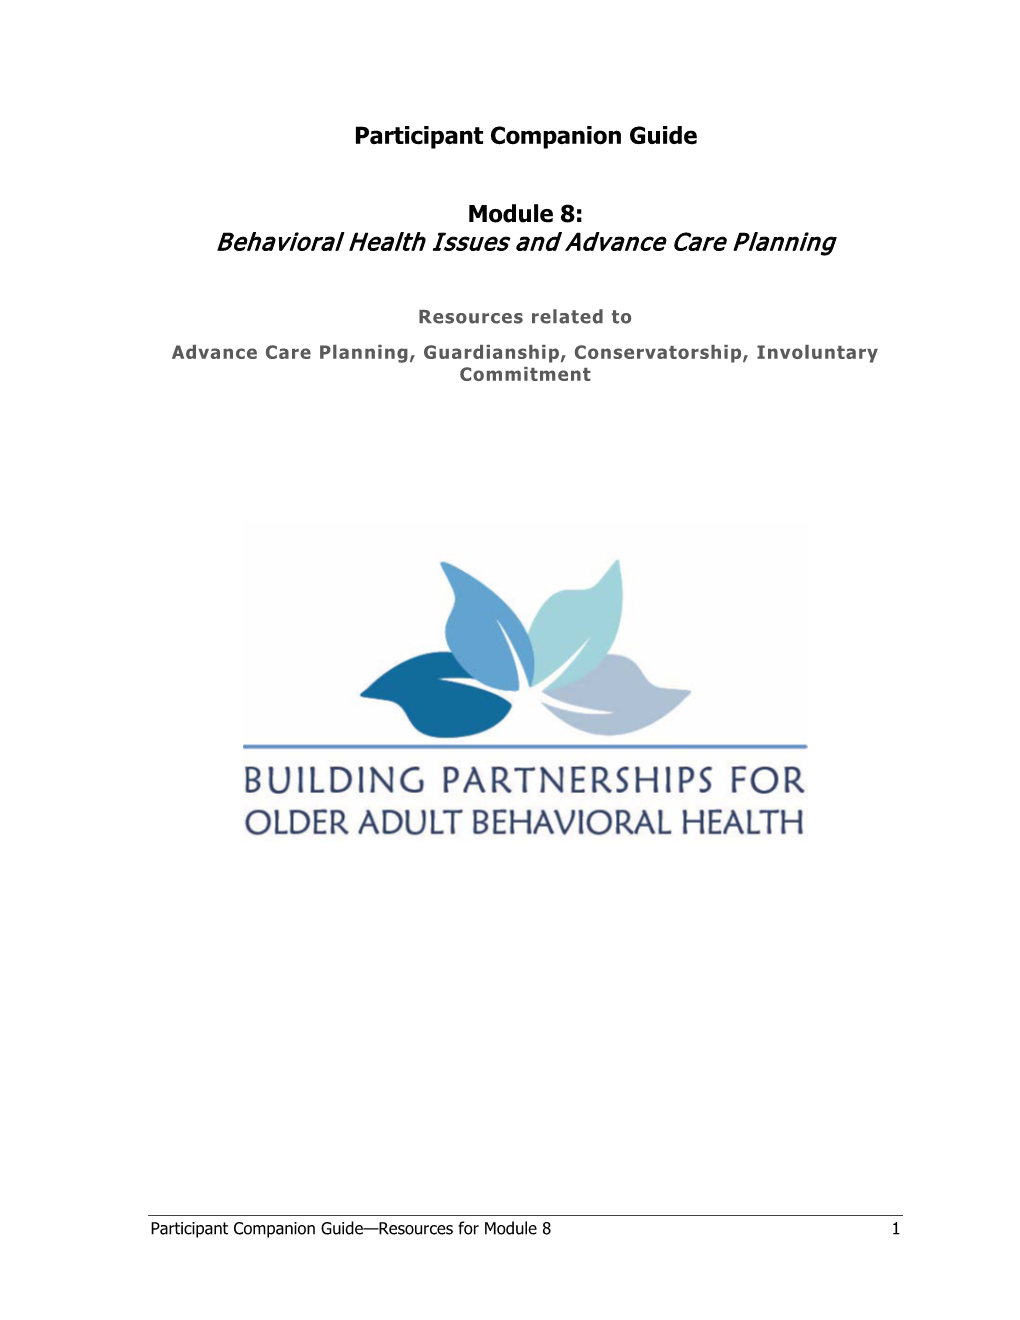 Behavioral Health Issues and Advance Care Planning